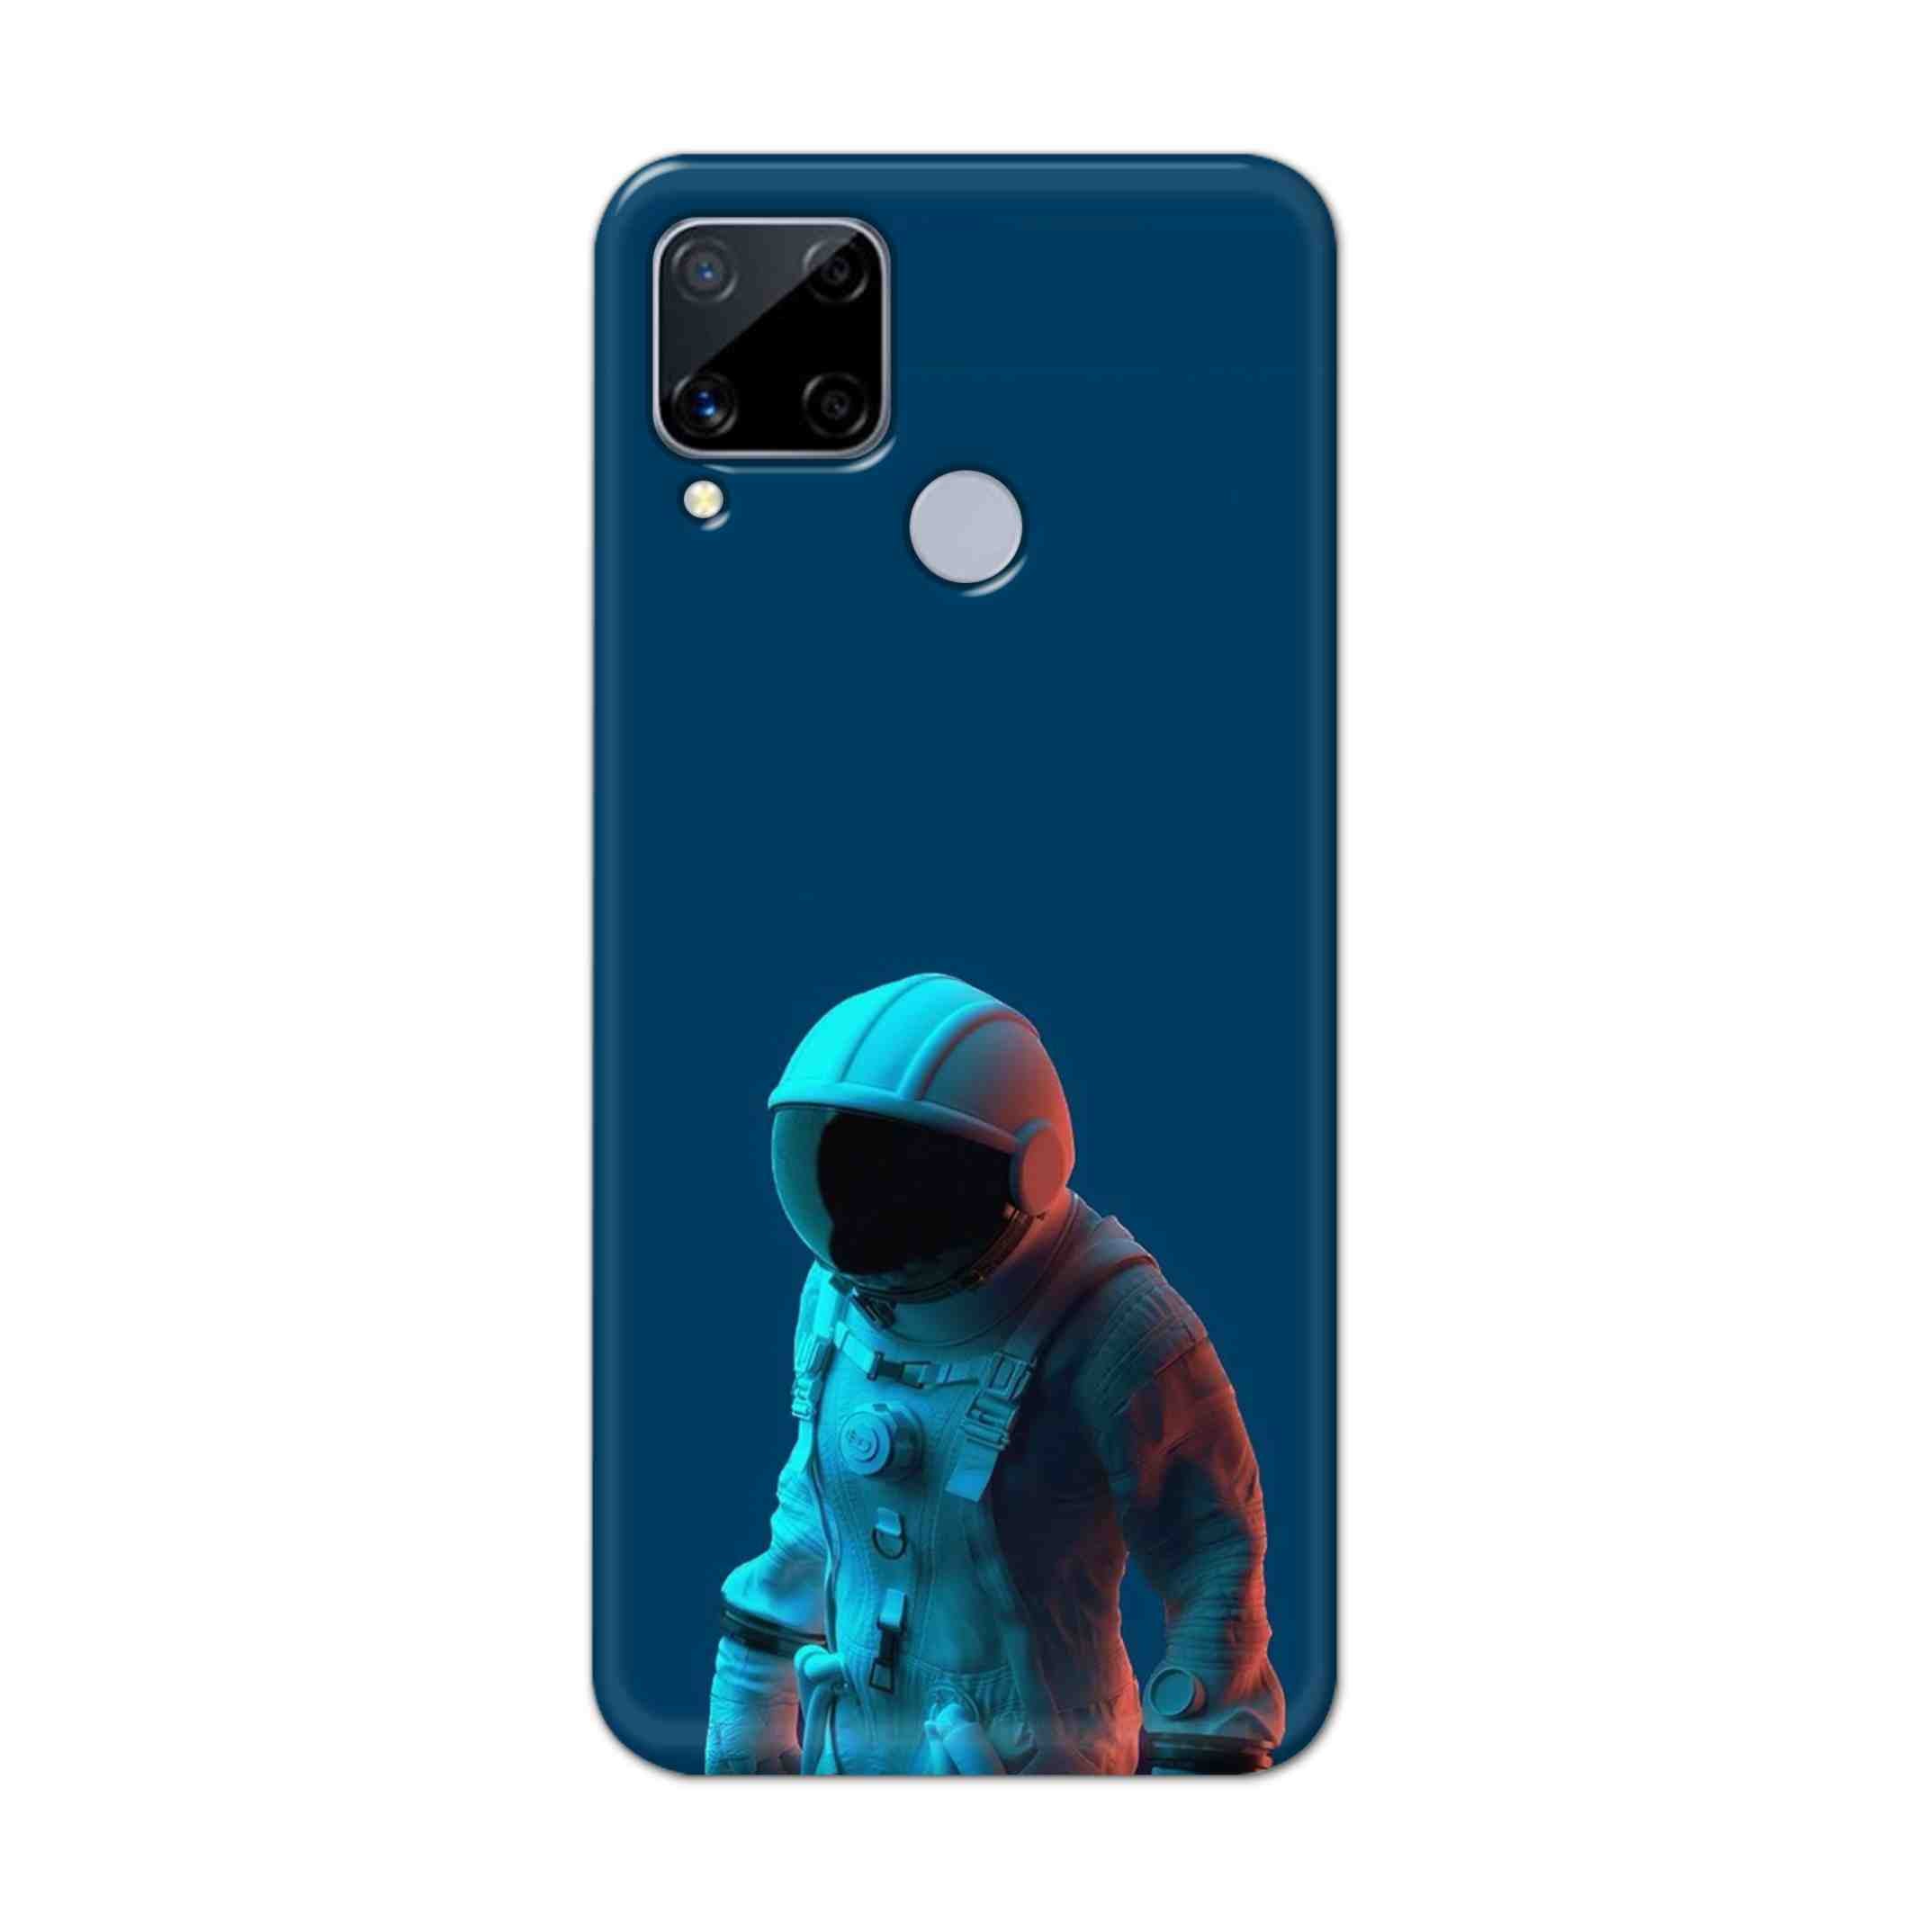 Buy Blue Astronaut Hard Back Mobile Phone Case Cover For Realme C15 Online